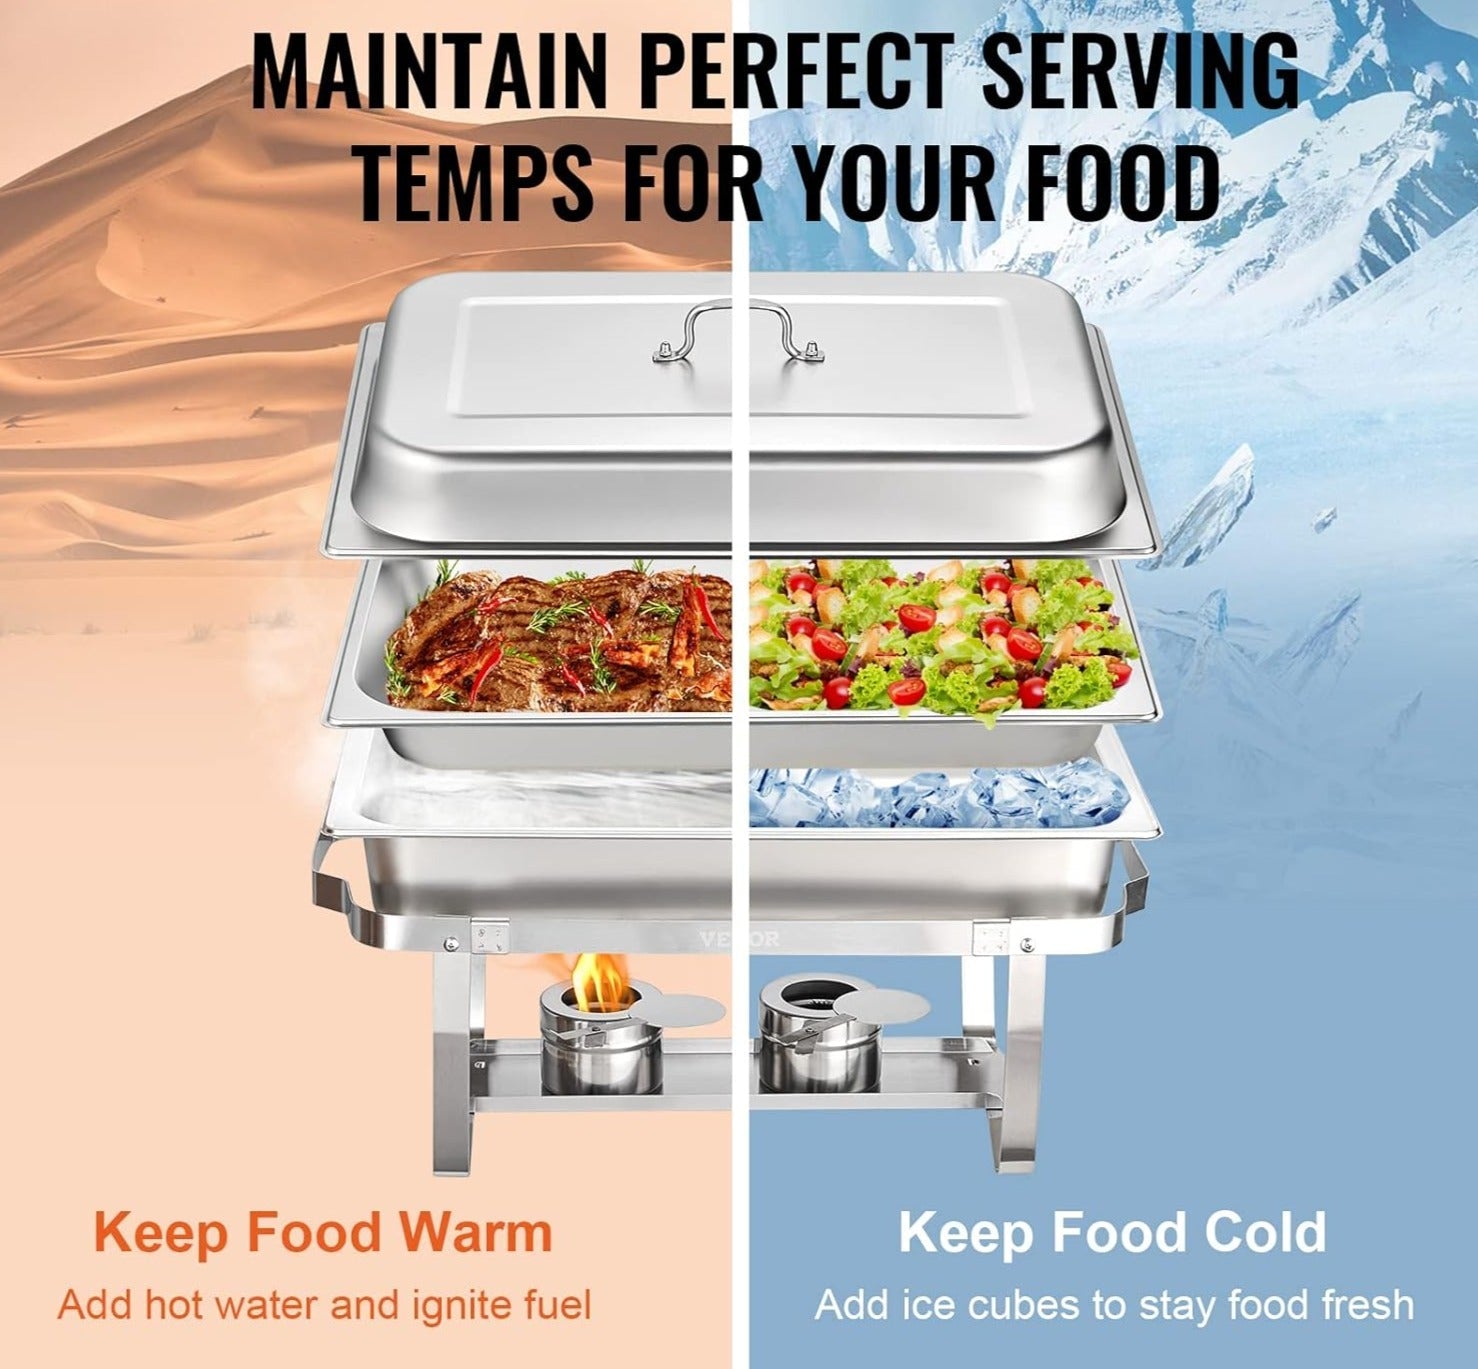 What is the Recommended Temperature to Keep Food Warm